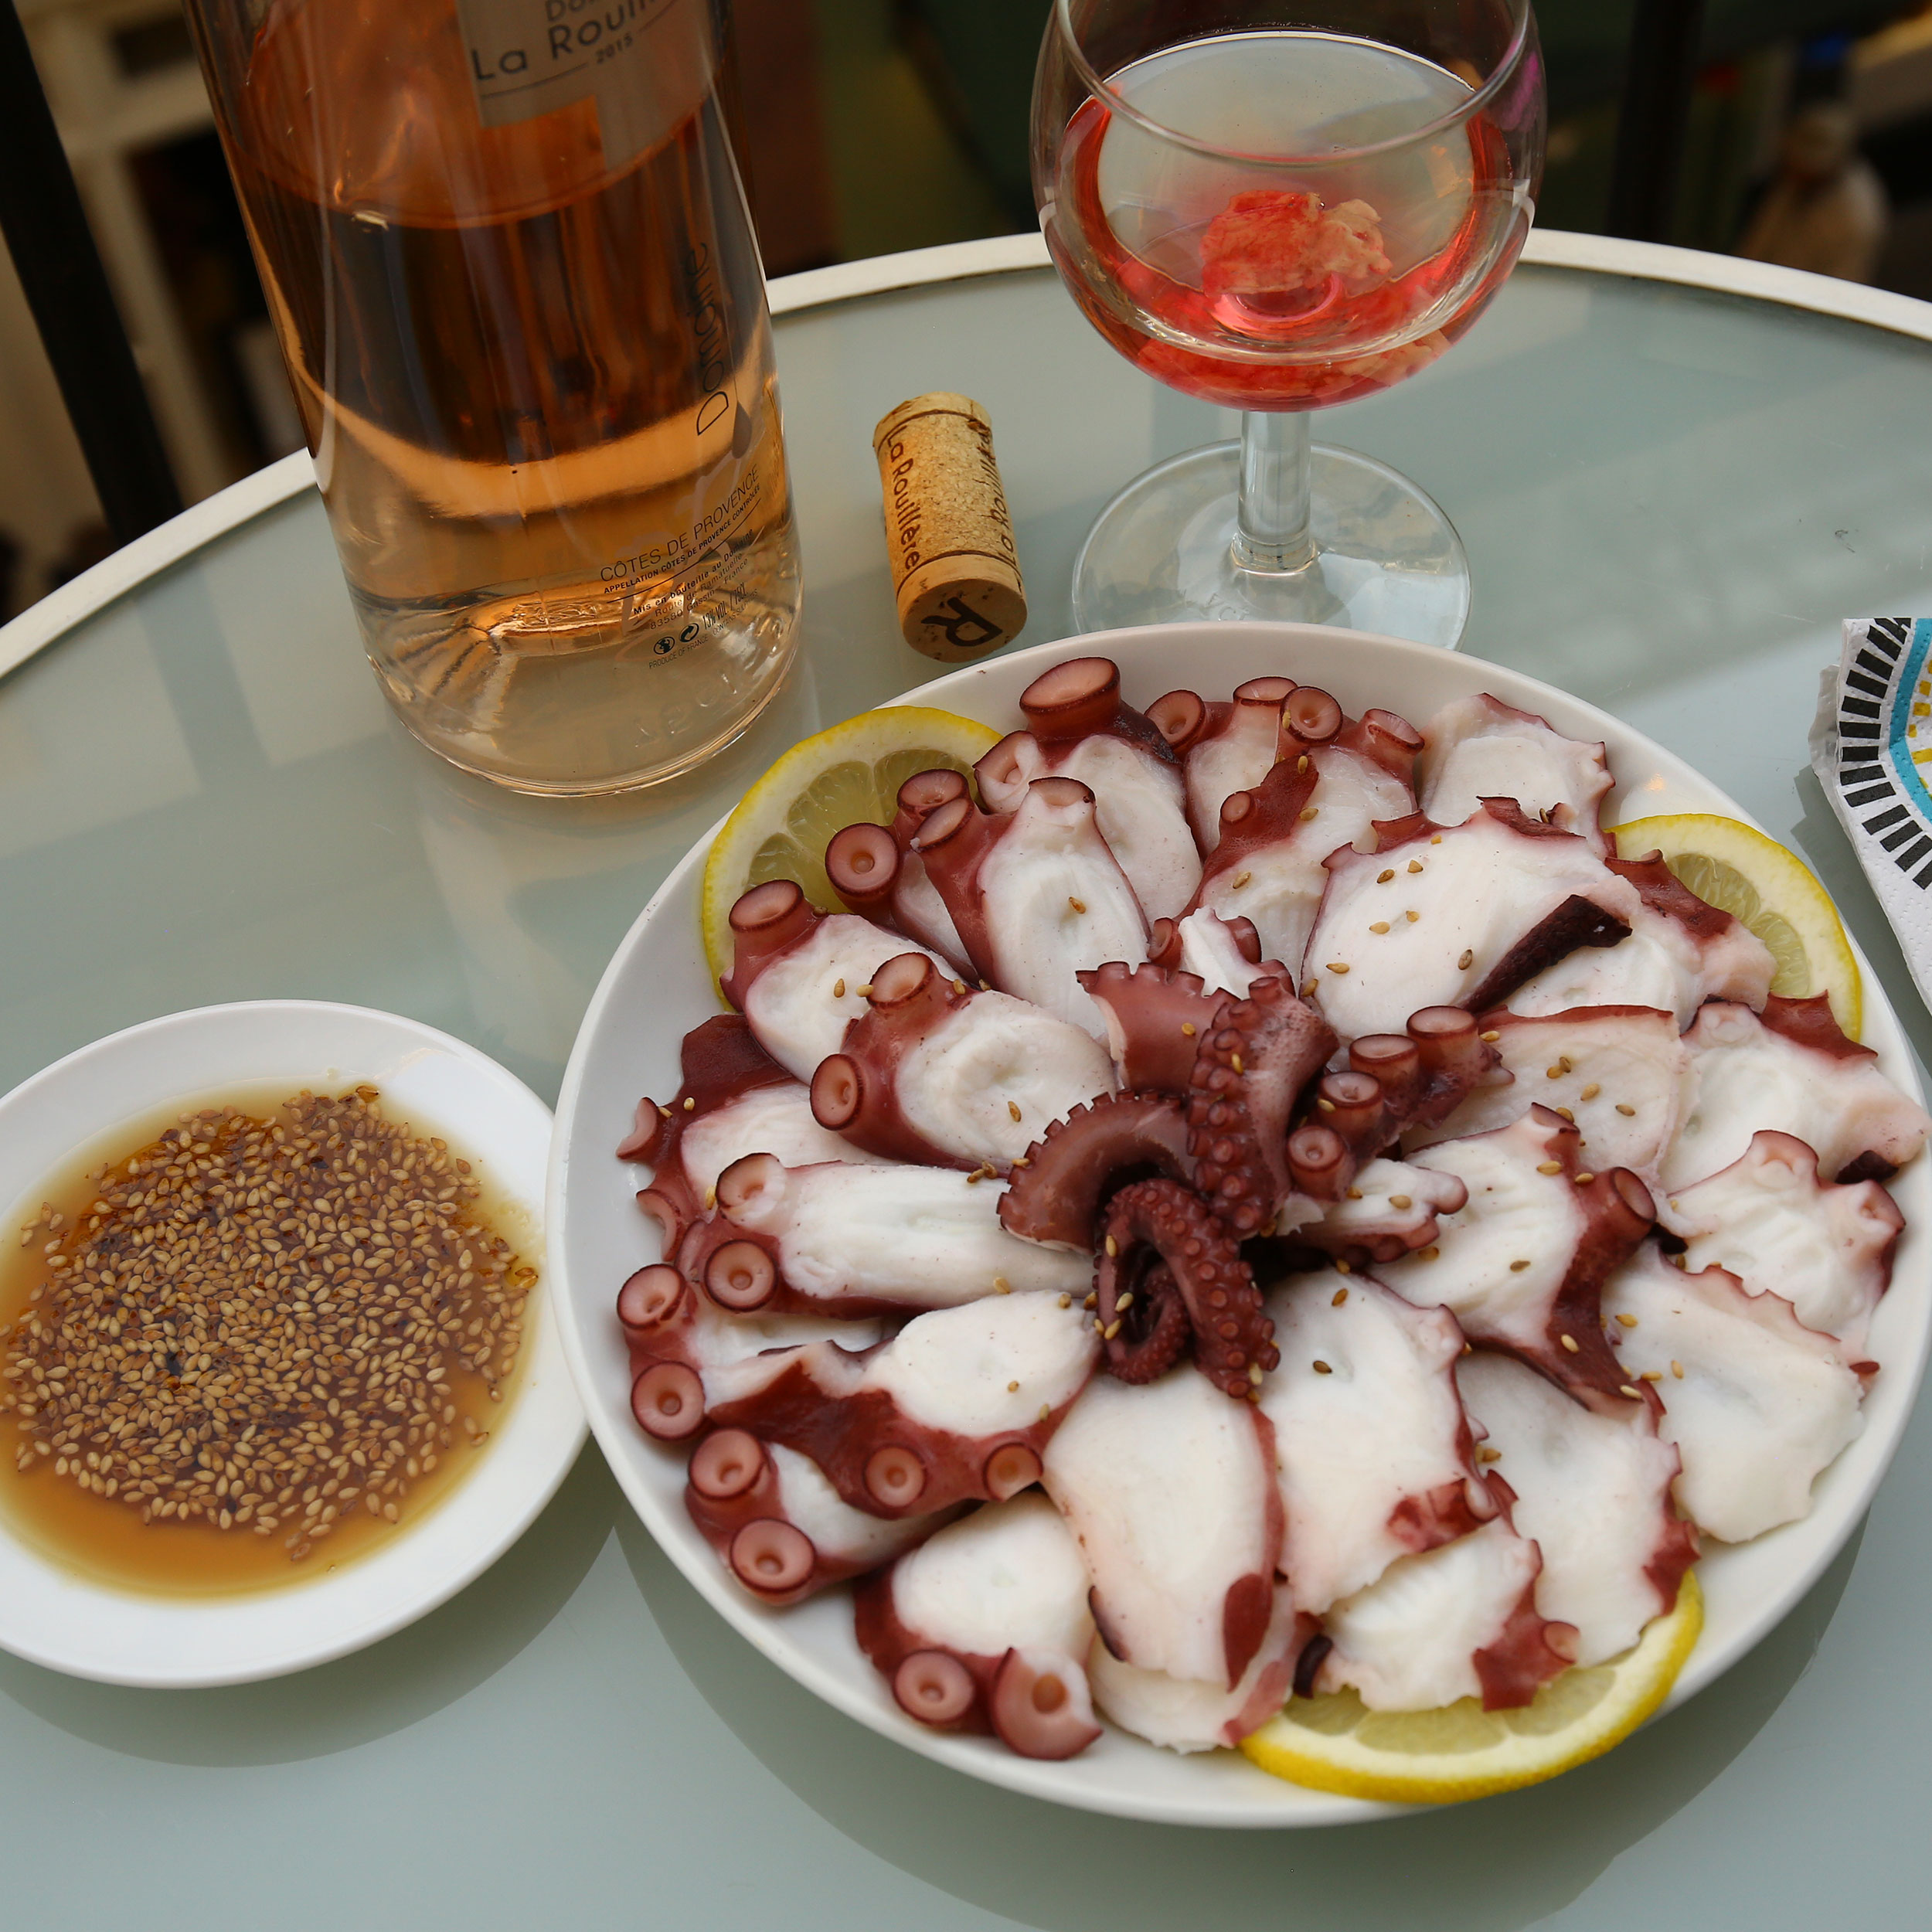 Octopus slices with sesame dipping sauce (Muneo-sukhoe: 문어숙회 ...